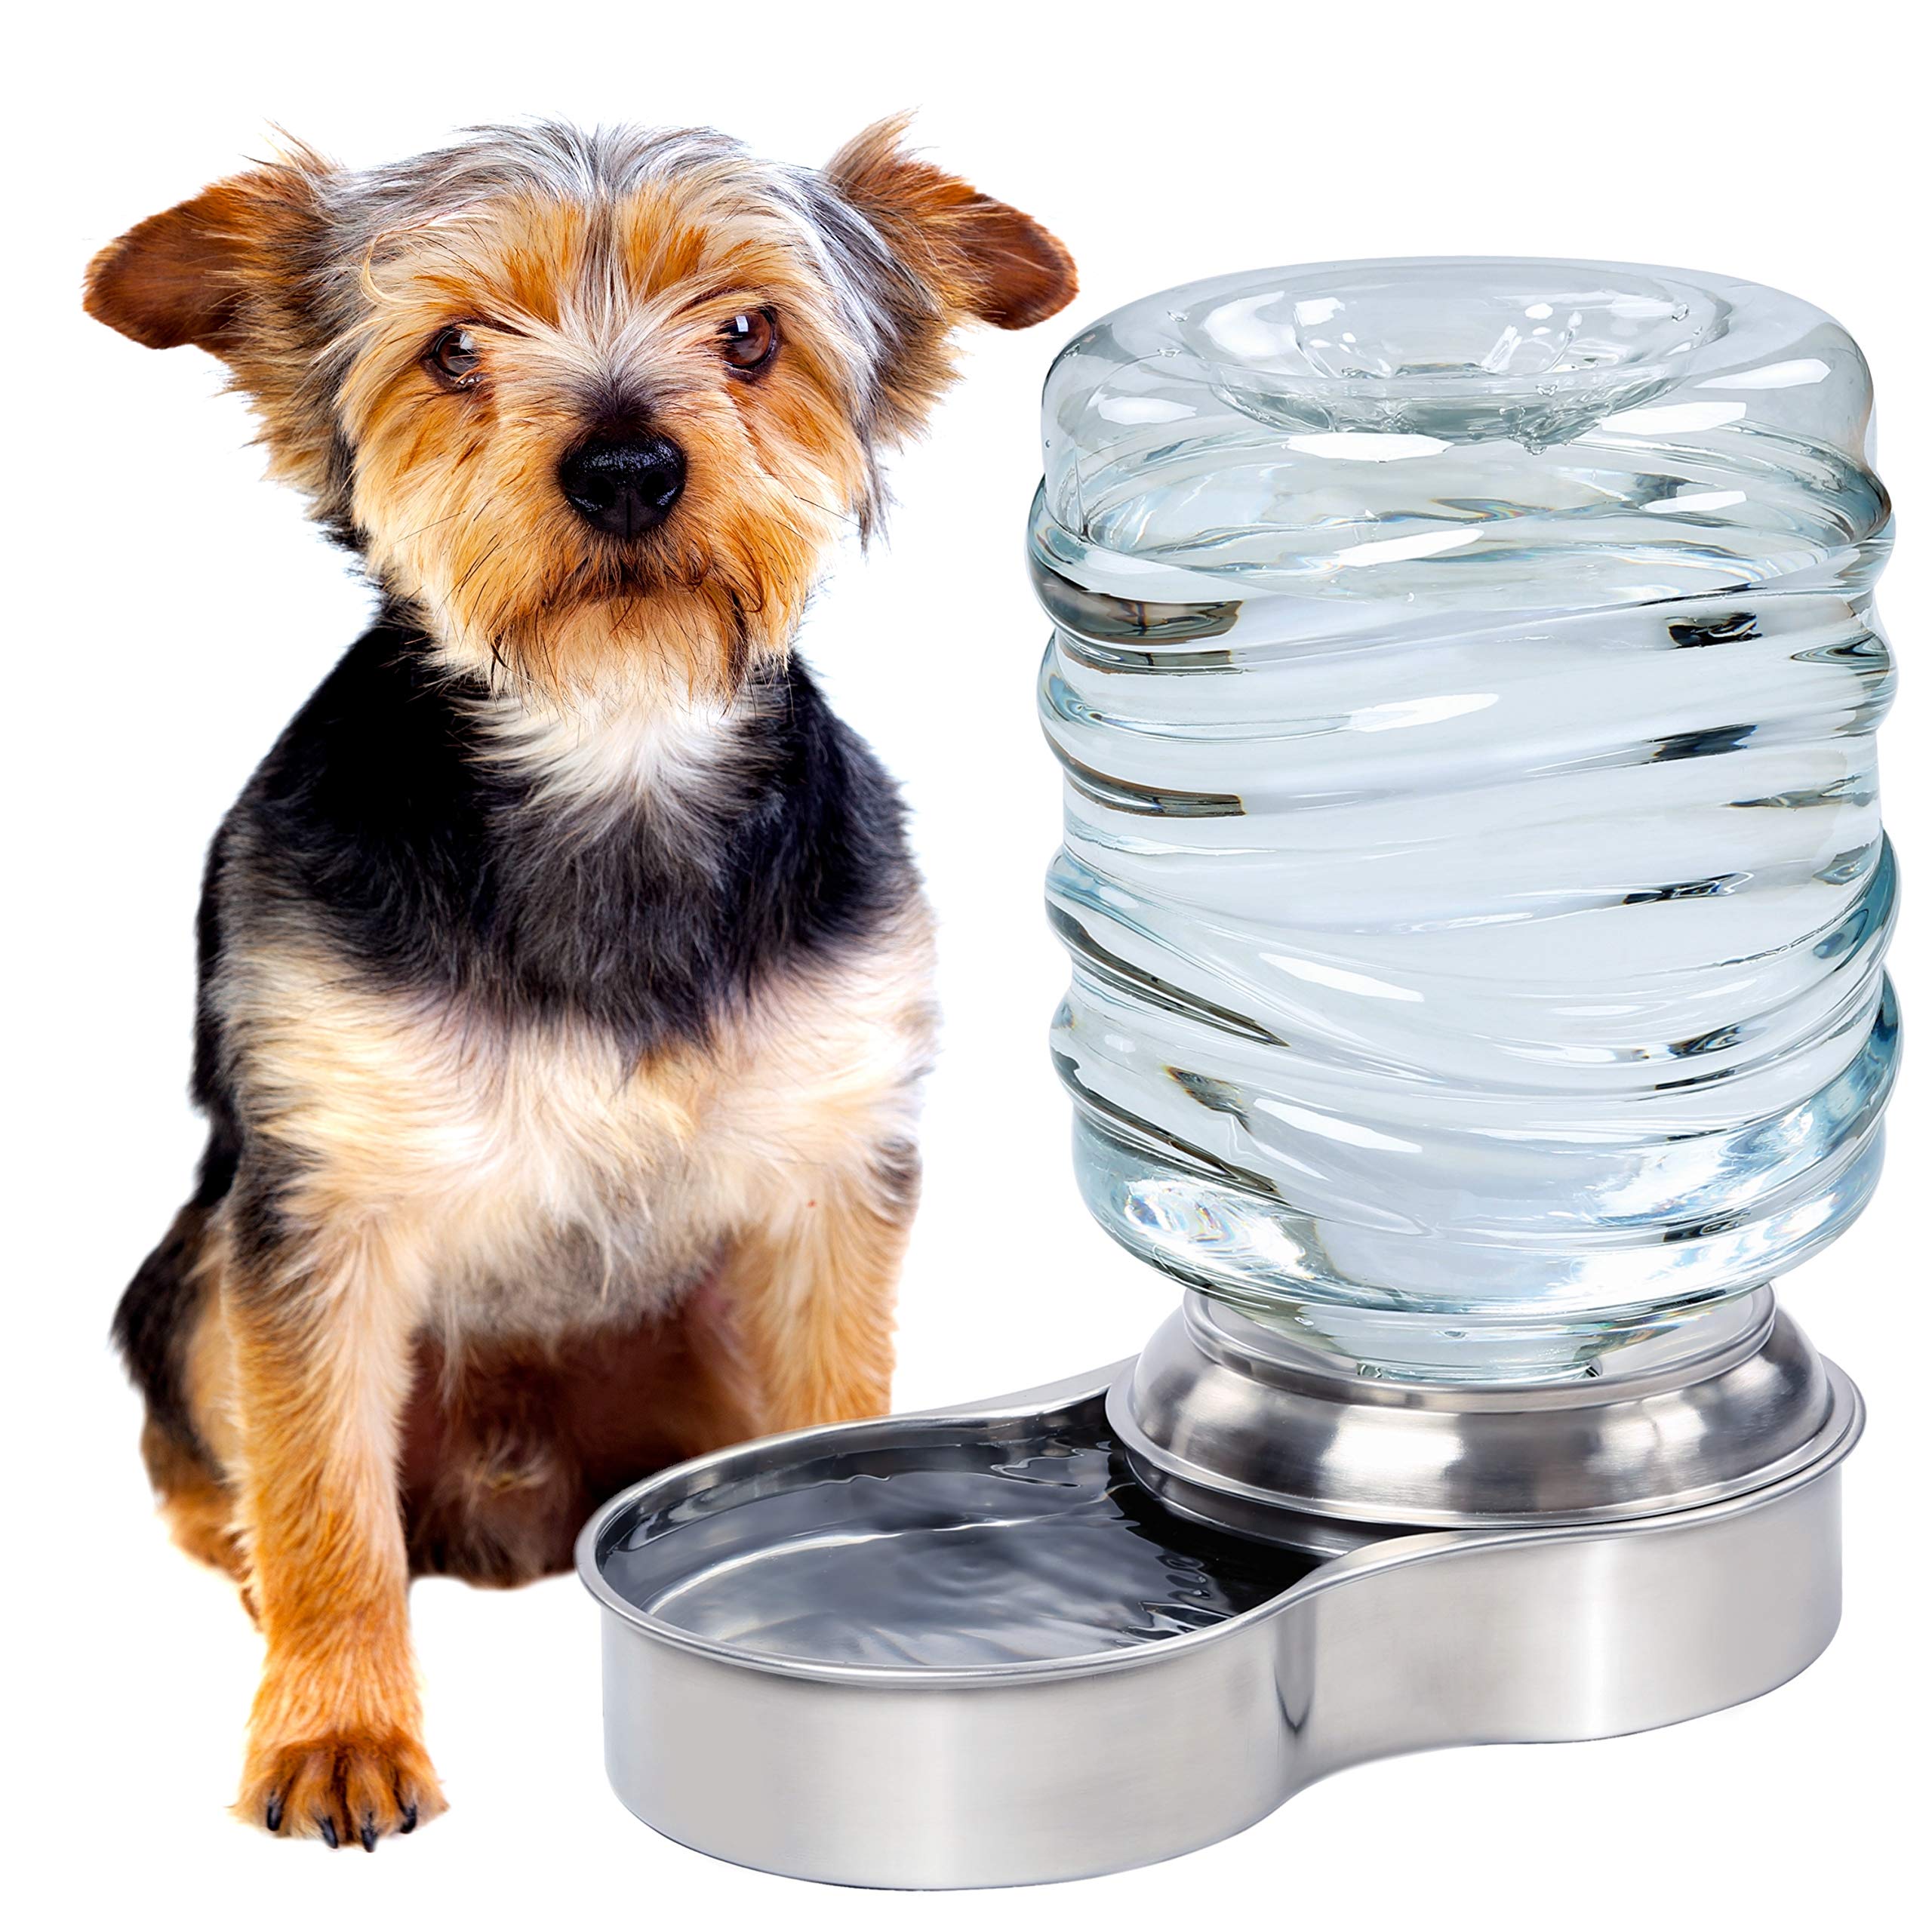 Bundaloo Dog Water Bowl Dispenser - Automatic Slow Refilling System Keeps Stainless Steel Drinking Dish Filled - Refillable 3 Liter Bottle, Non-Skid Feet - Clean, Safe, & Fresh Drink for Pet Dogs  - Good